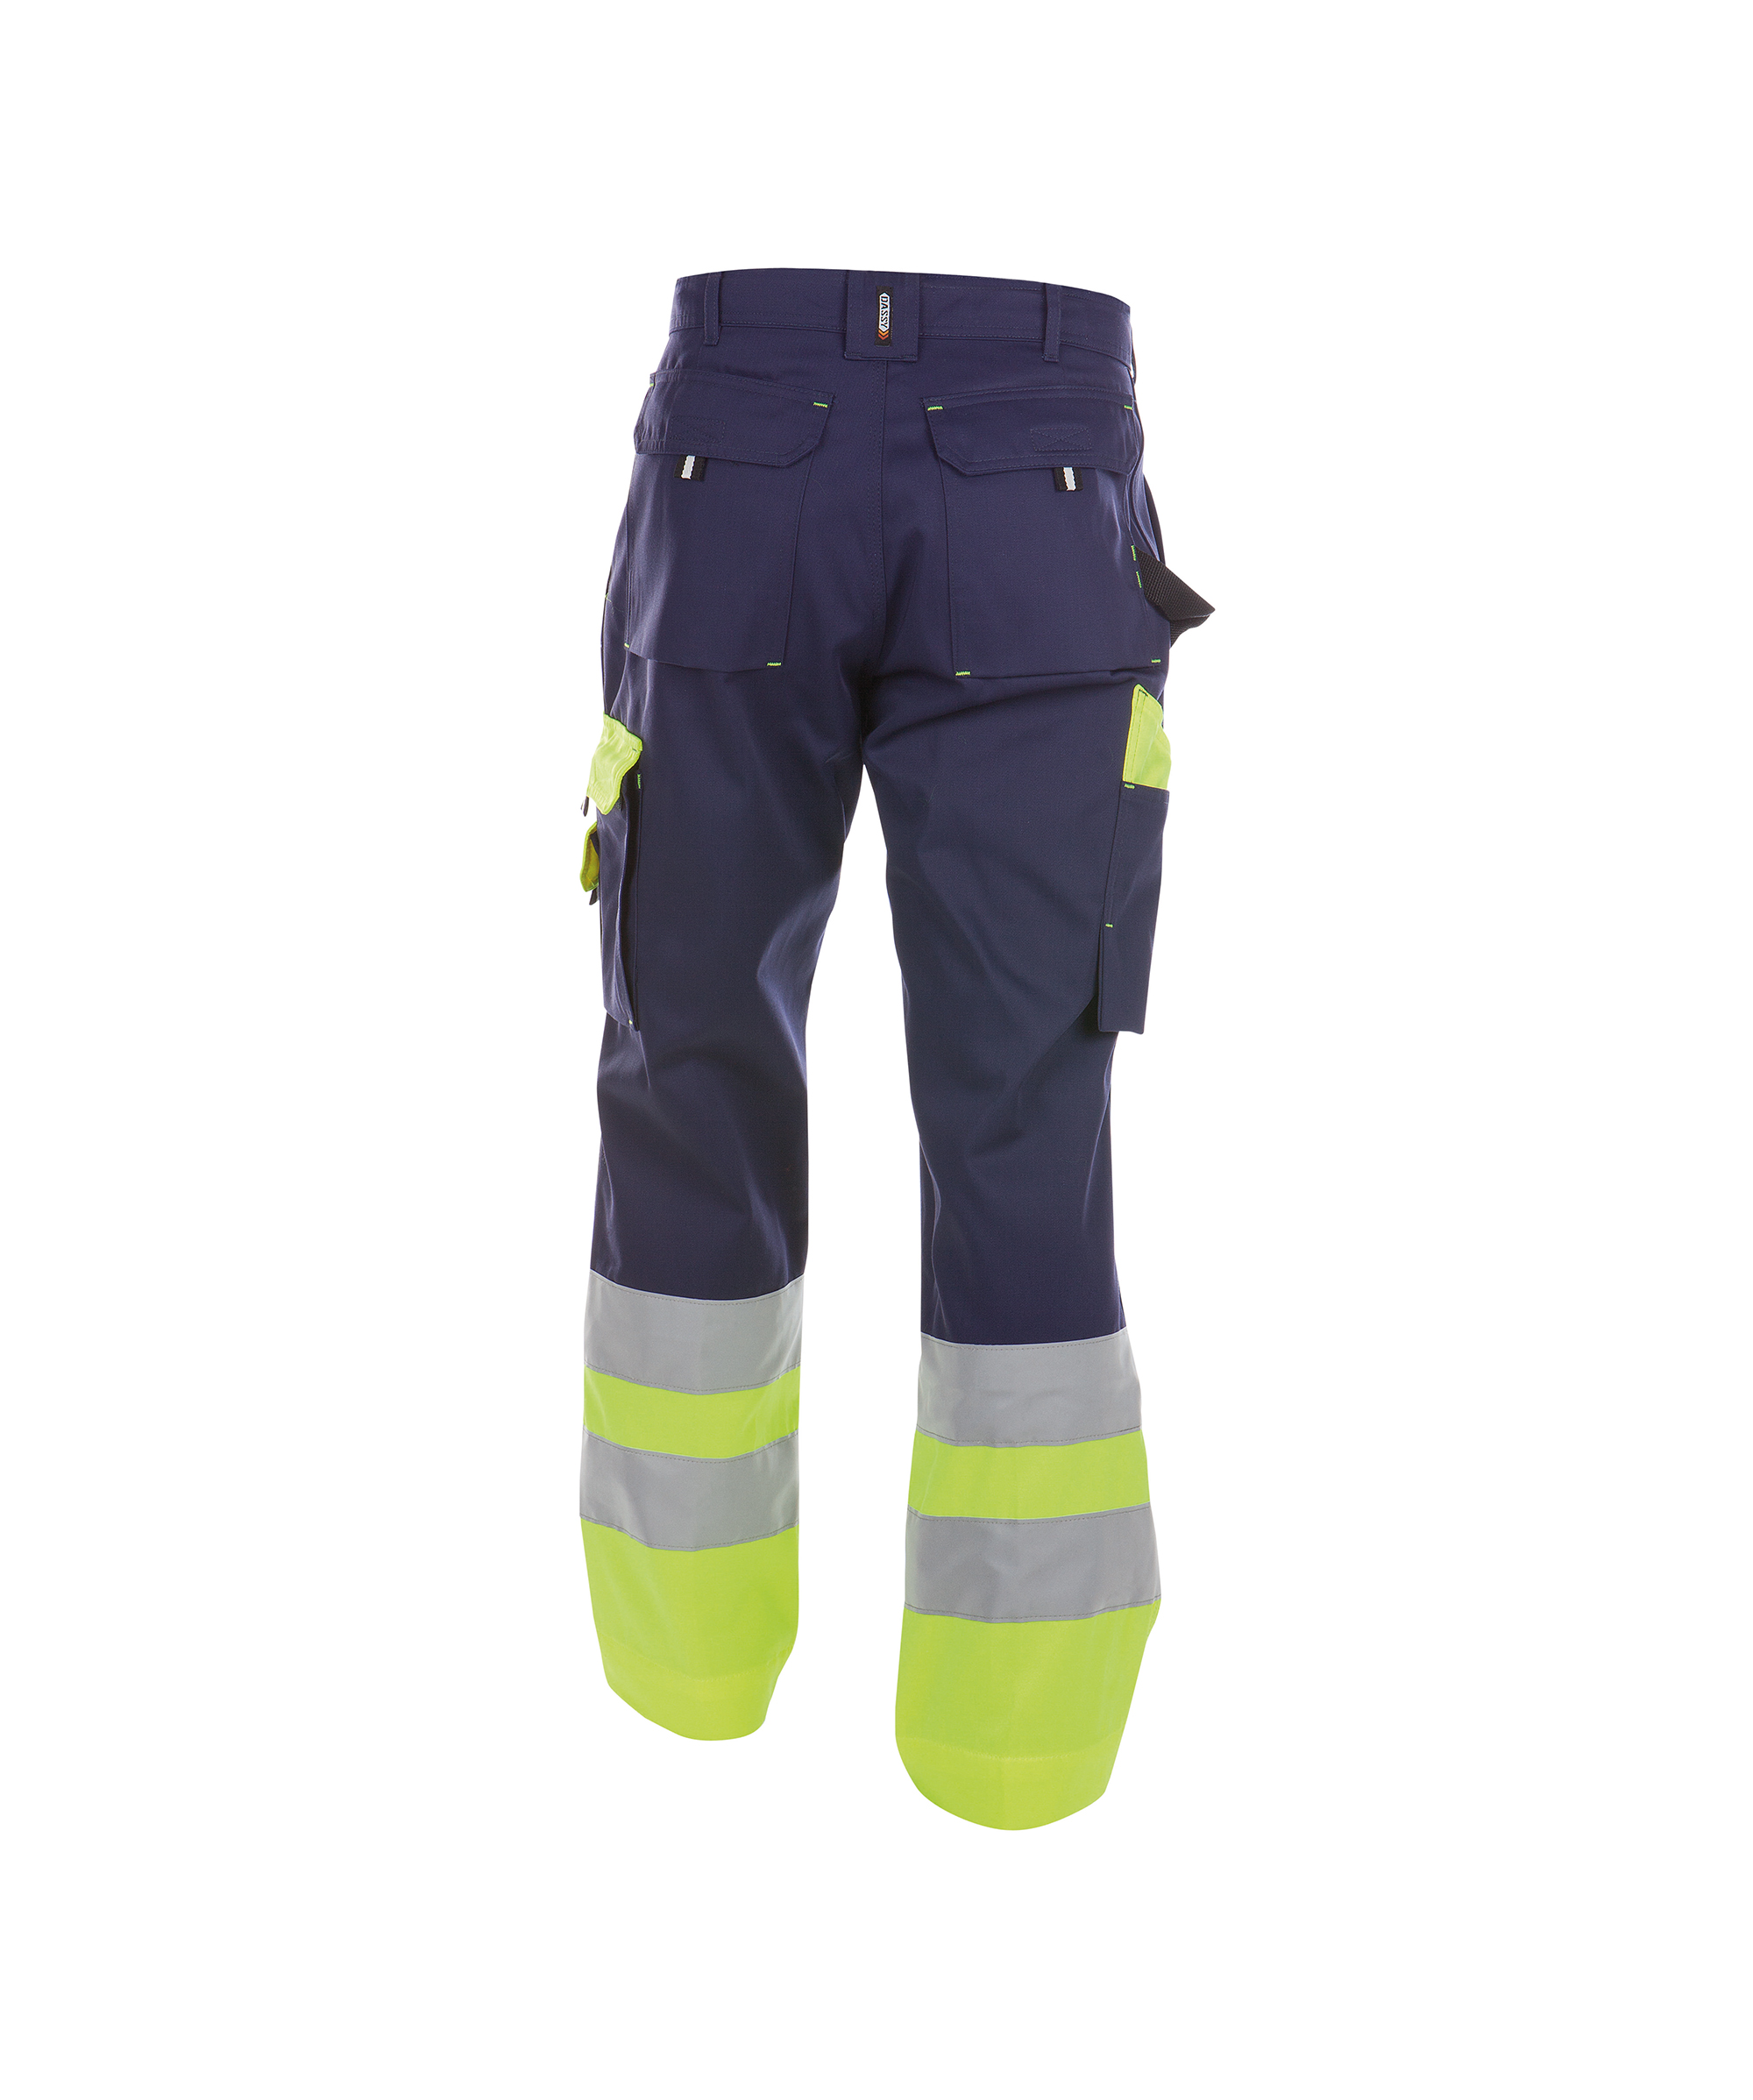 omaha_high-visibility-work-trousers_navy-fluo-yellow_back.jpg